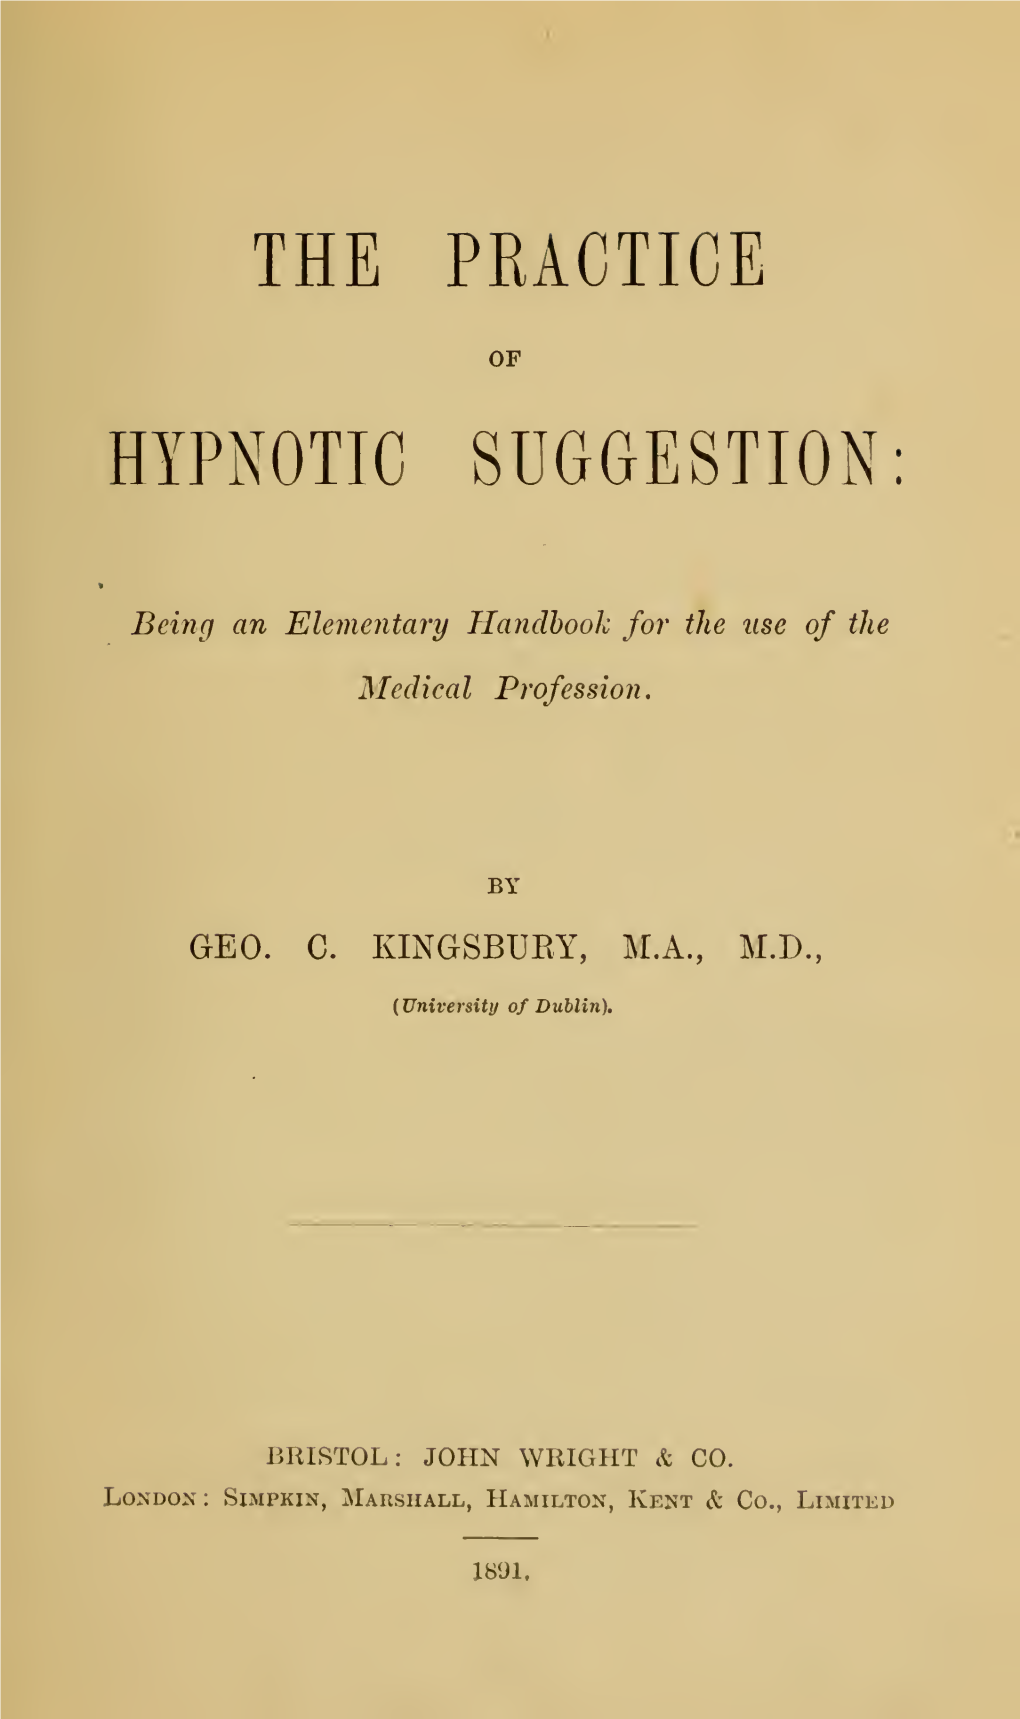 The Practice of Hypnotic Suggestion, Being and Elementary